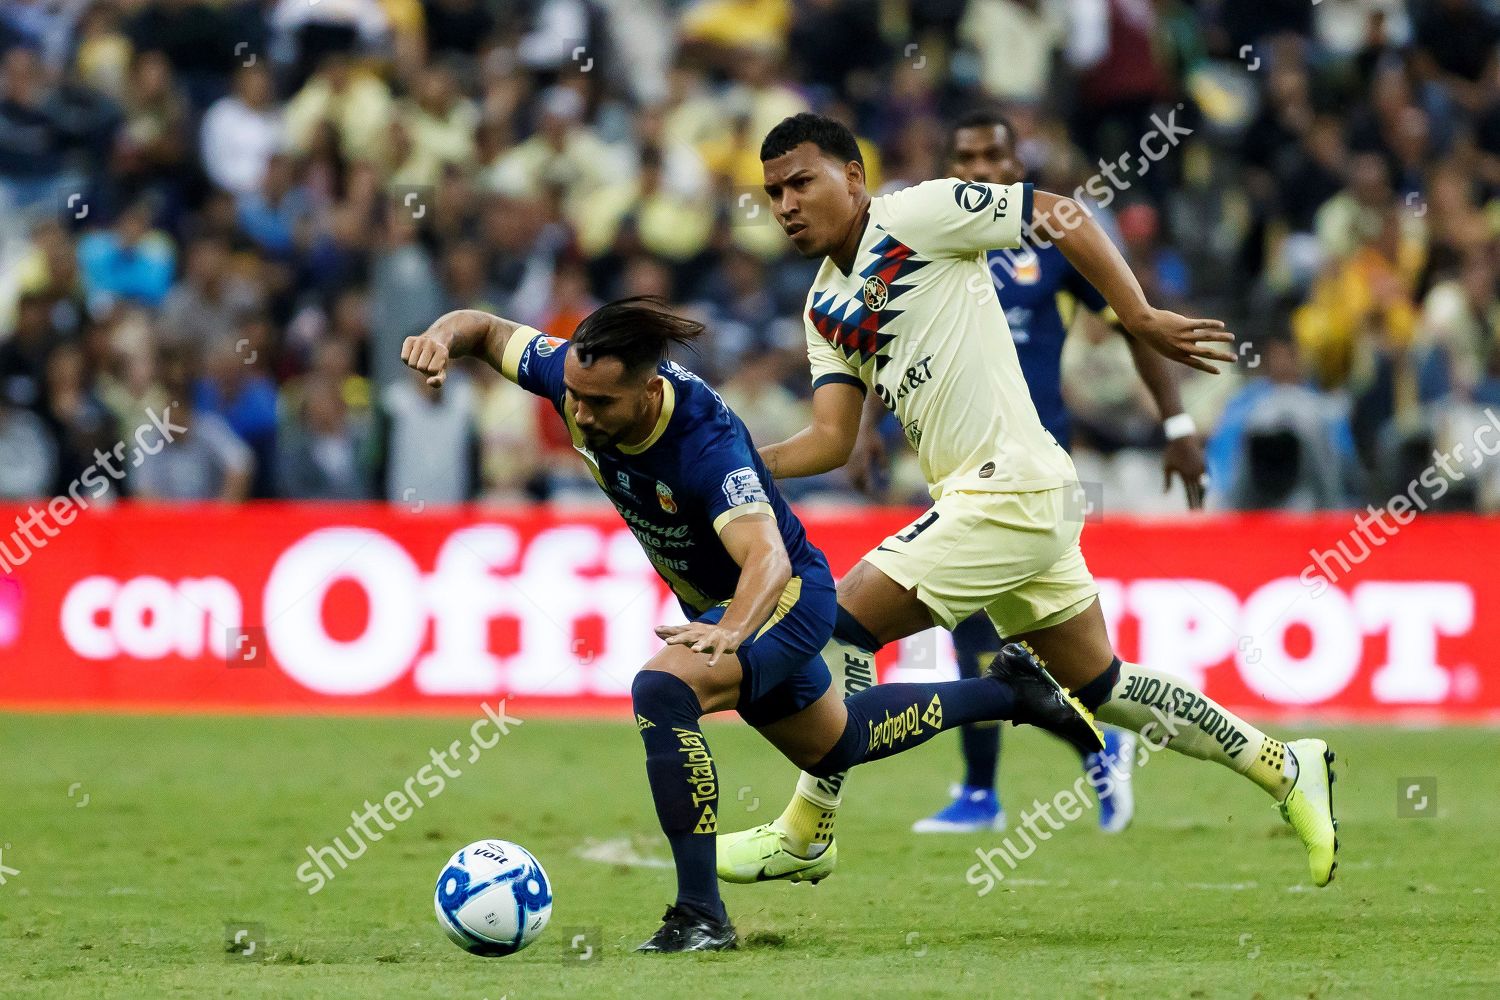 Roger Martinez R Club America Action Editorial Stock Photo - Stock Image |  Shutterstock